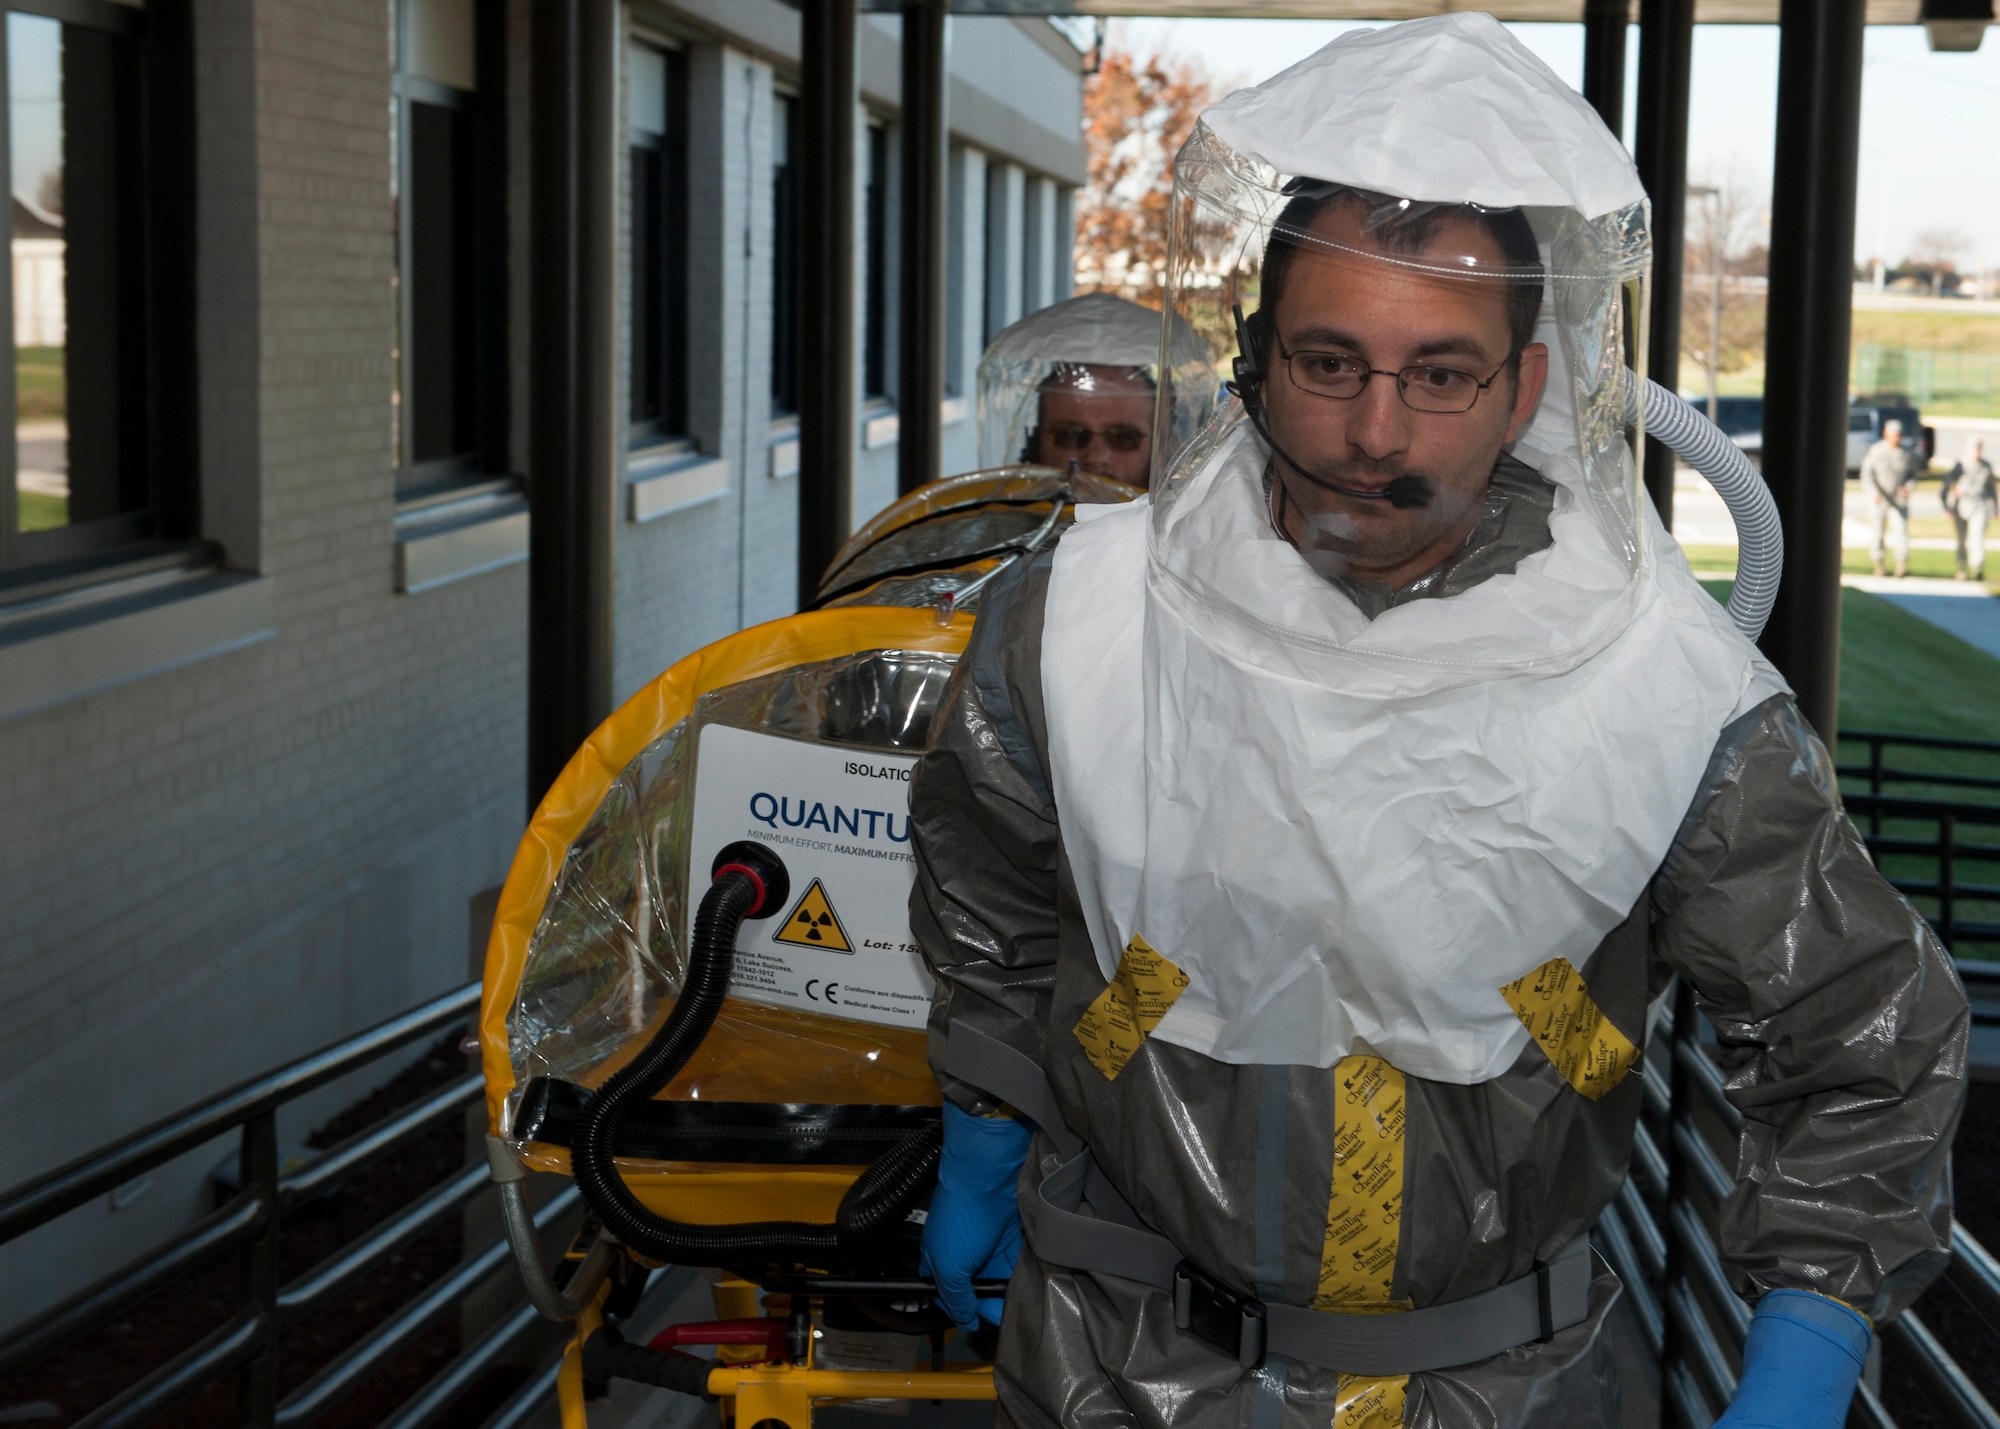 Dave Brown, St. Francis Healthcare emergency medical technician, transports a single patient bio-containment unit (isolation pod) into the 436th Medical Group Clinic Nov. 3, 2015, at Dover Air Force Base, Del. The isolation pod was used to transport a suspected Ebola patient to Christiana Care’s Wilmington Hospital. (U.S. Air Force photo/Senior Airman Zachary Cacicia)